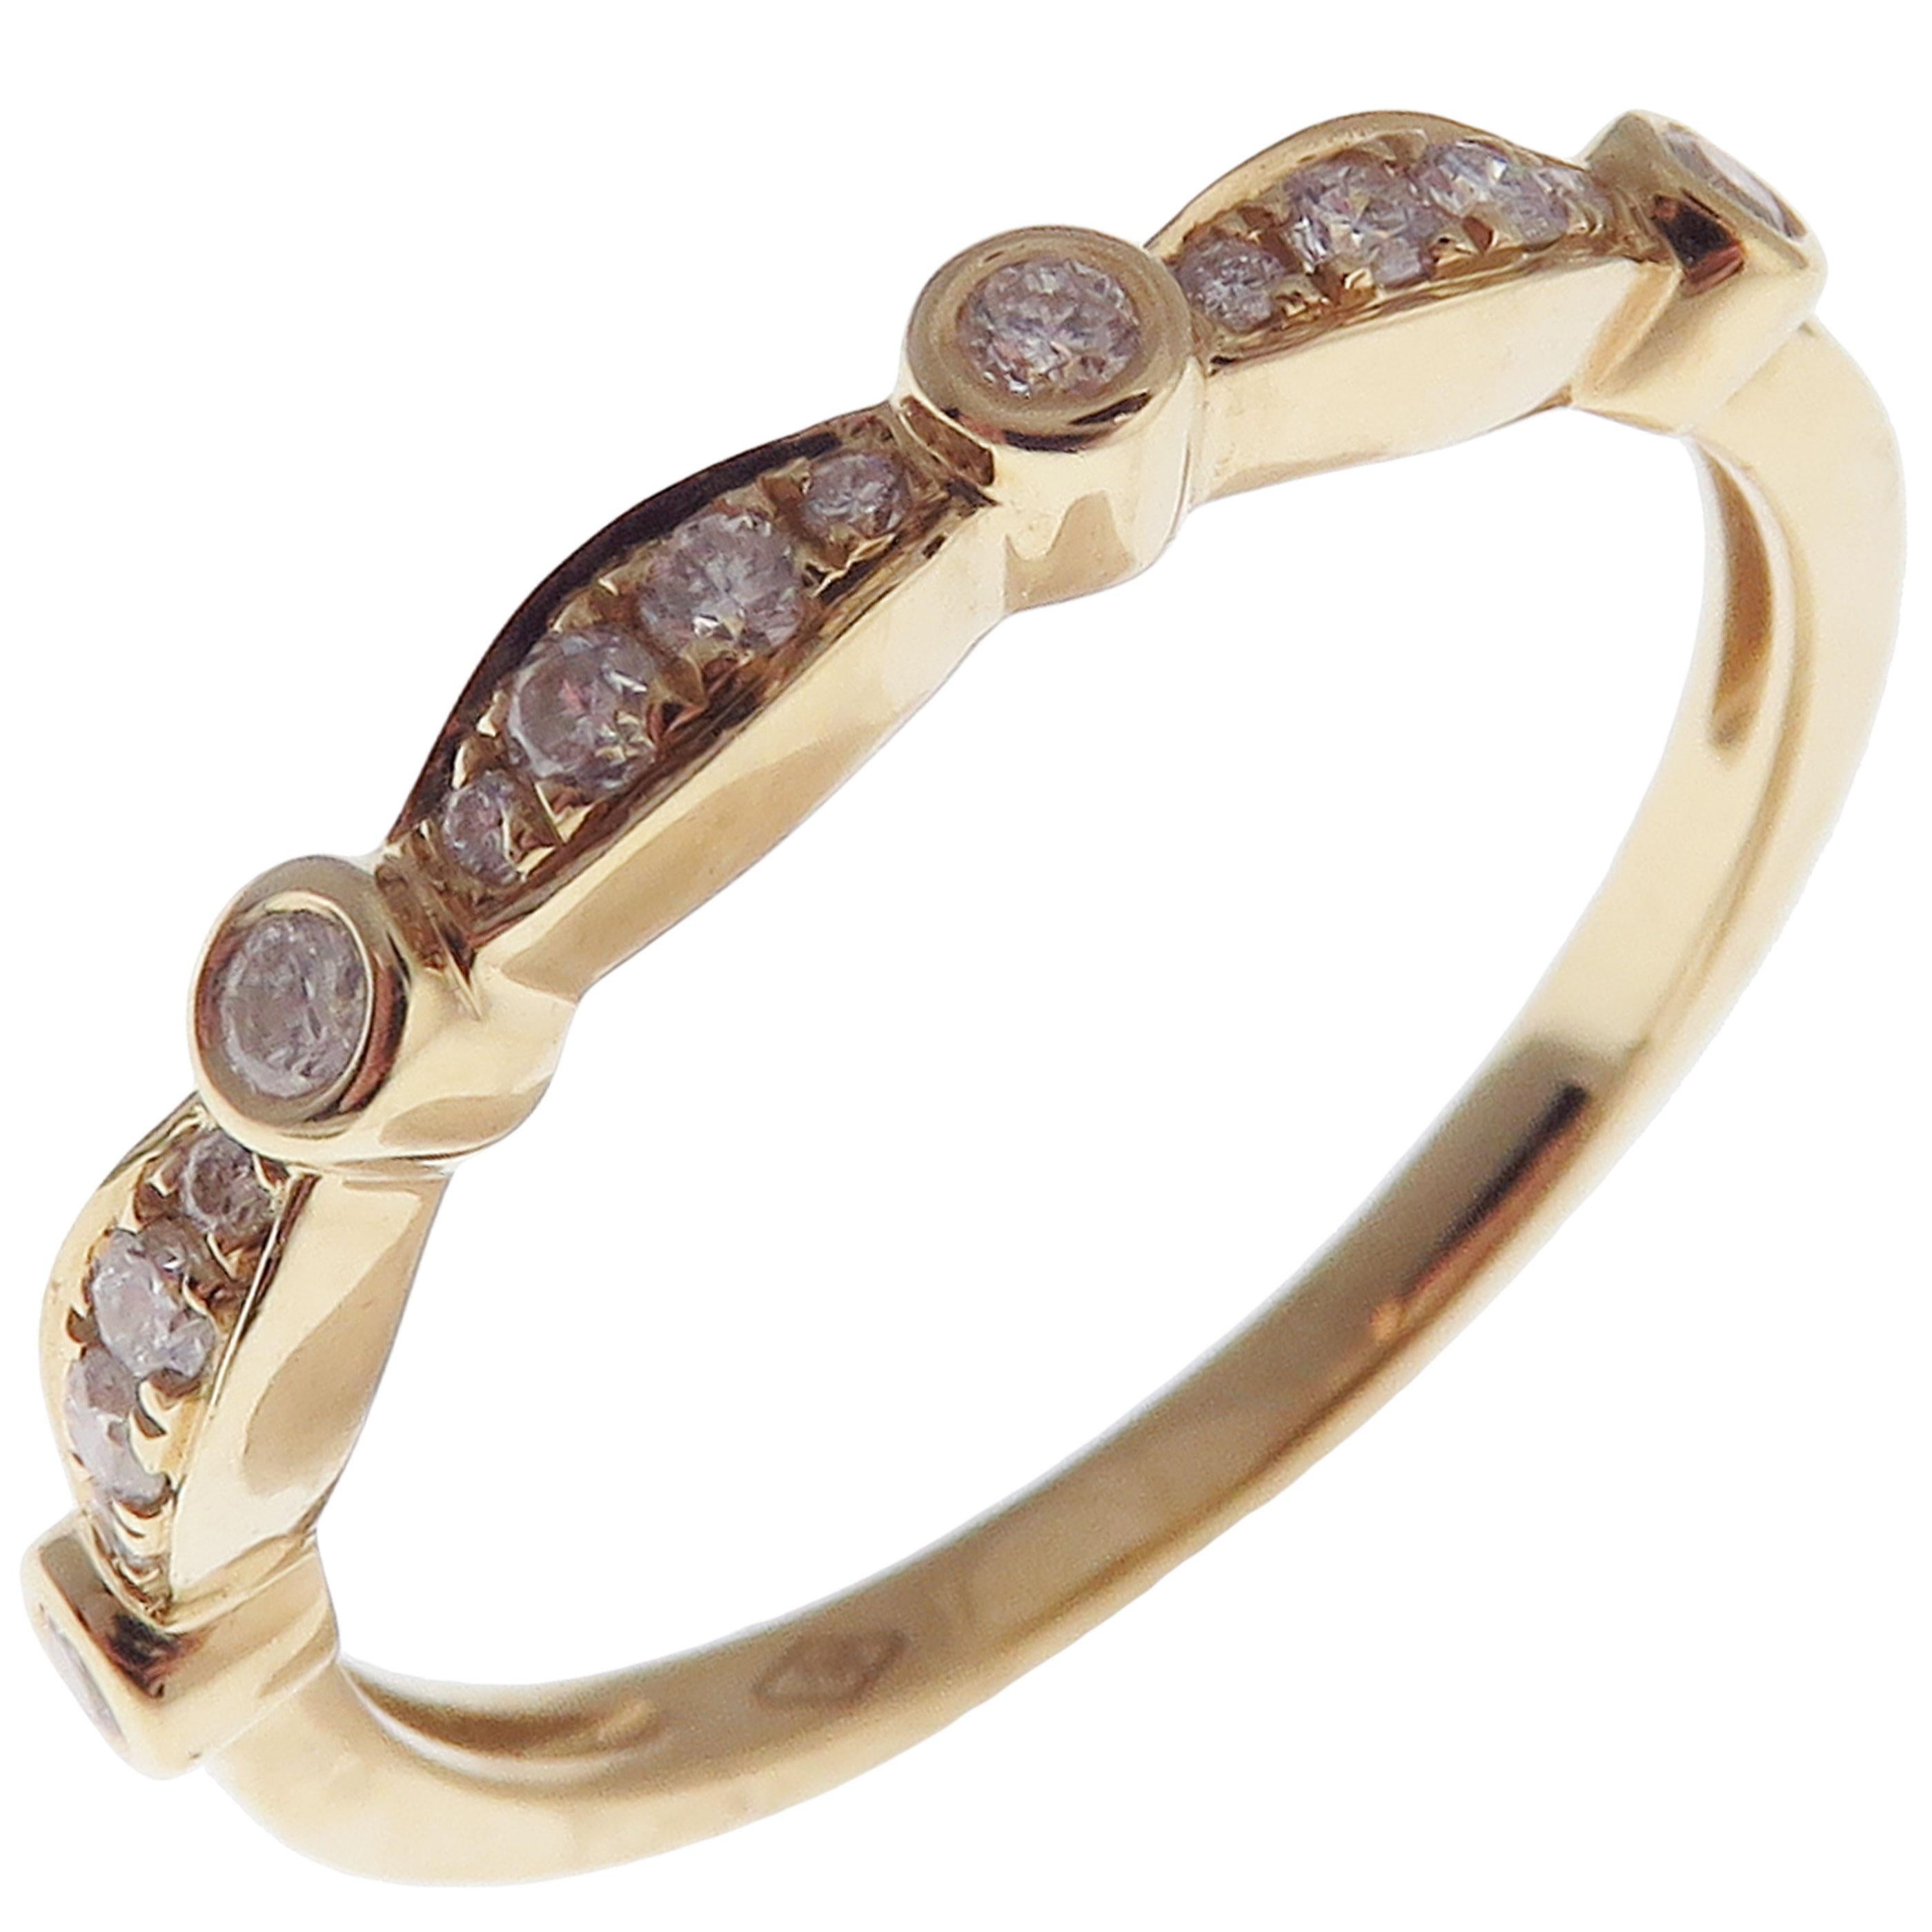 This simple stackable ring is crafted in 18-karat yellow gold, featuring 17 round white diamonds totaling of 0.19 carats.
Approximate total weight 2.10 grams.
Standard Ring size 7
SI-G Quality natural white diamonds.